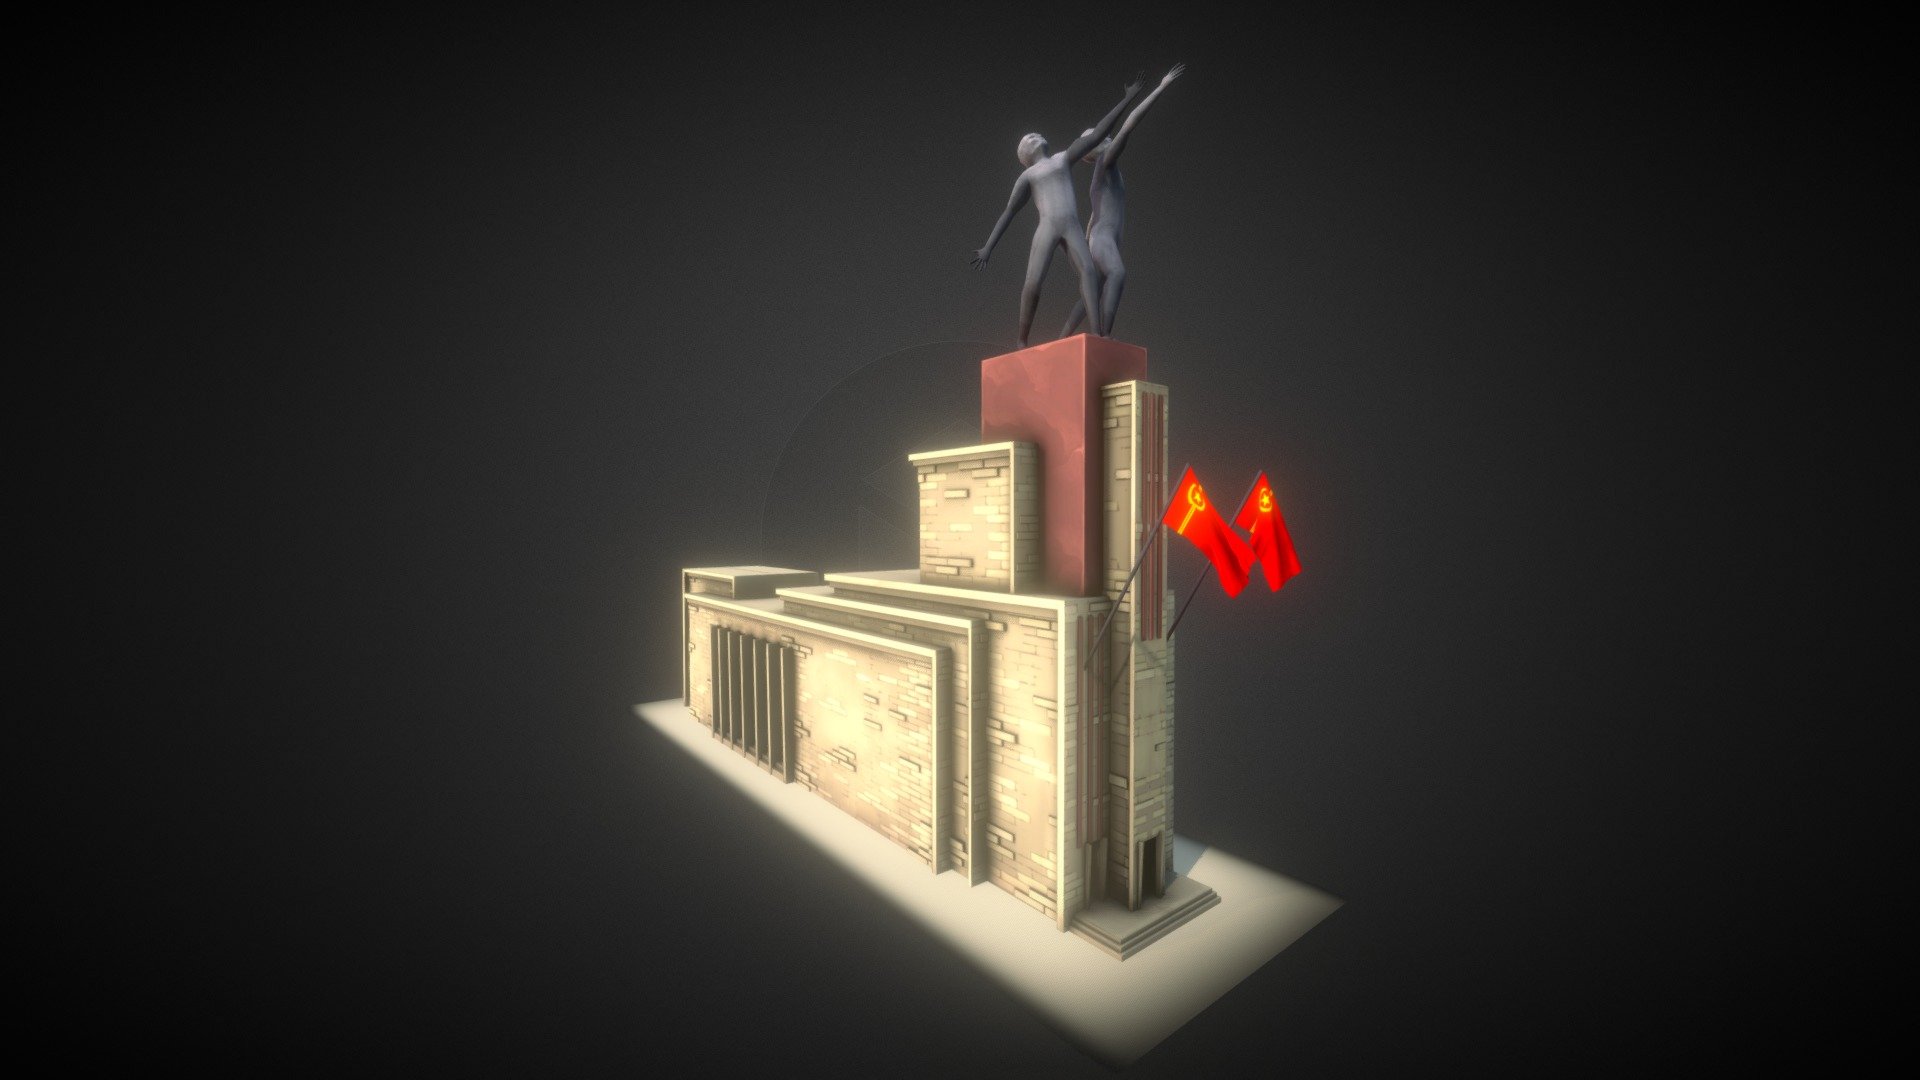 A building for my game its going to be very communist :) (not that i am communist) the guys on top still need work and symbols and somem more flaggs would not hurt - 1937 sovjet world expo inspired building - 3D model by adamnsexyname (Pieter) (@adamnsexyname) 3d model